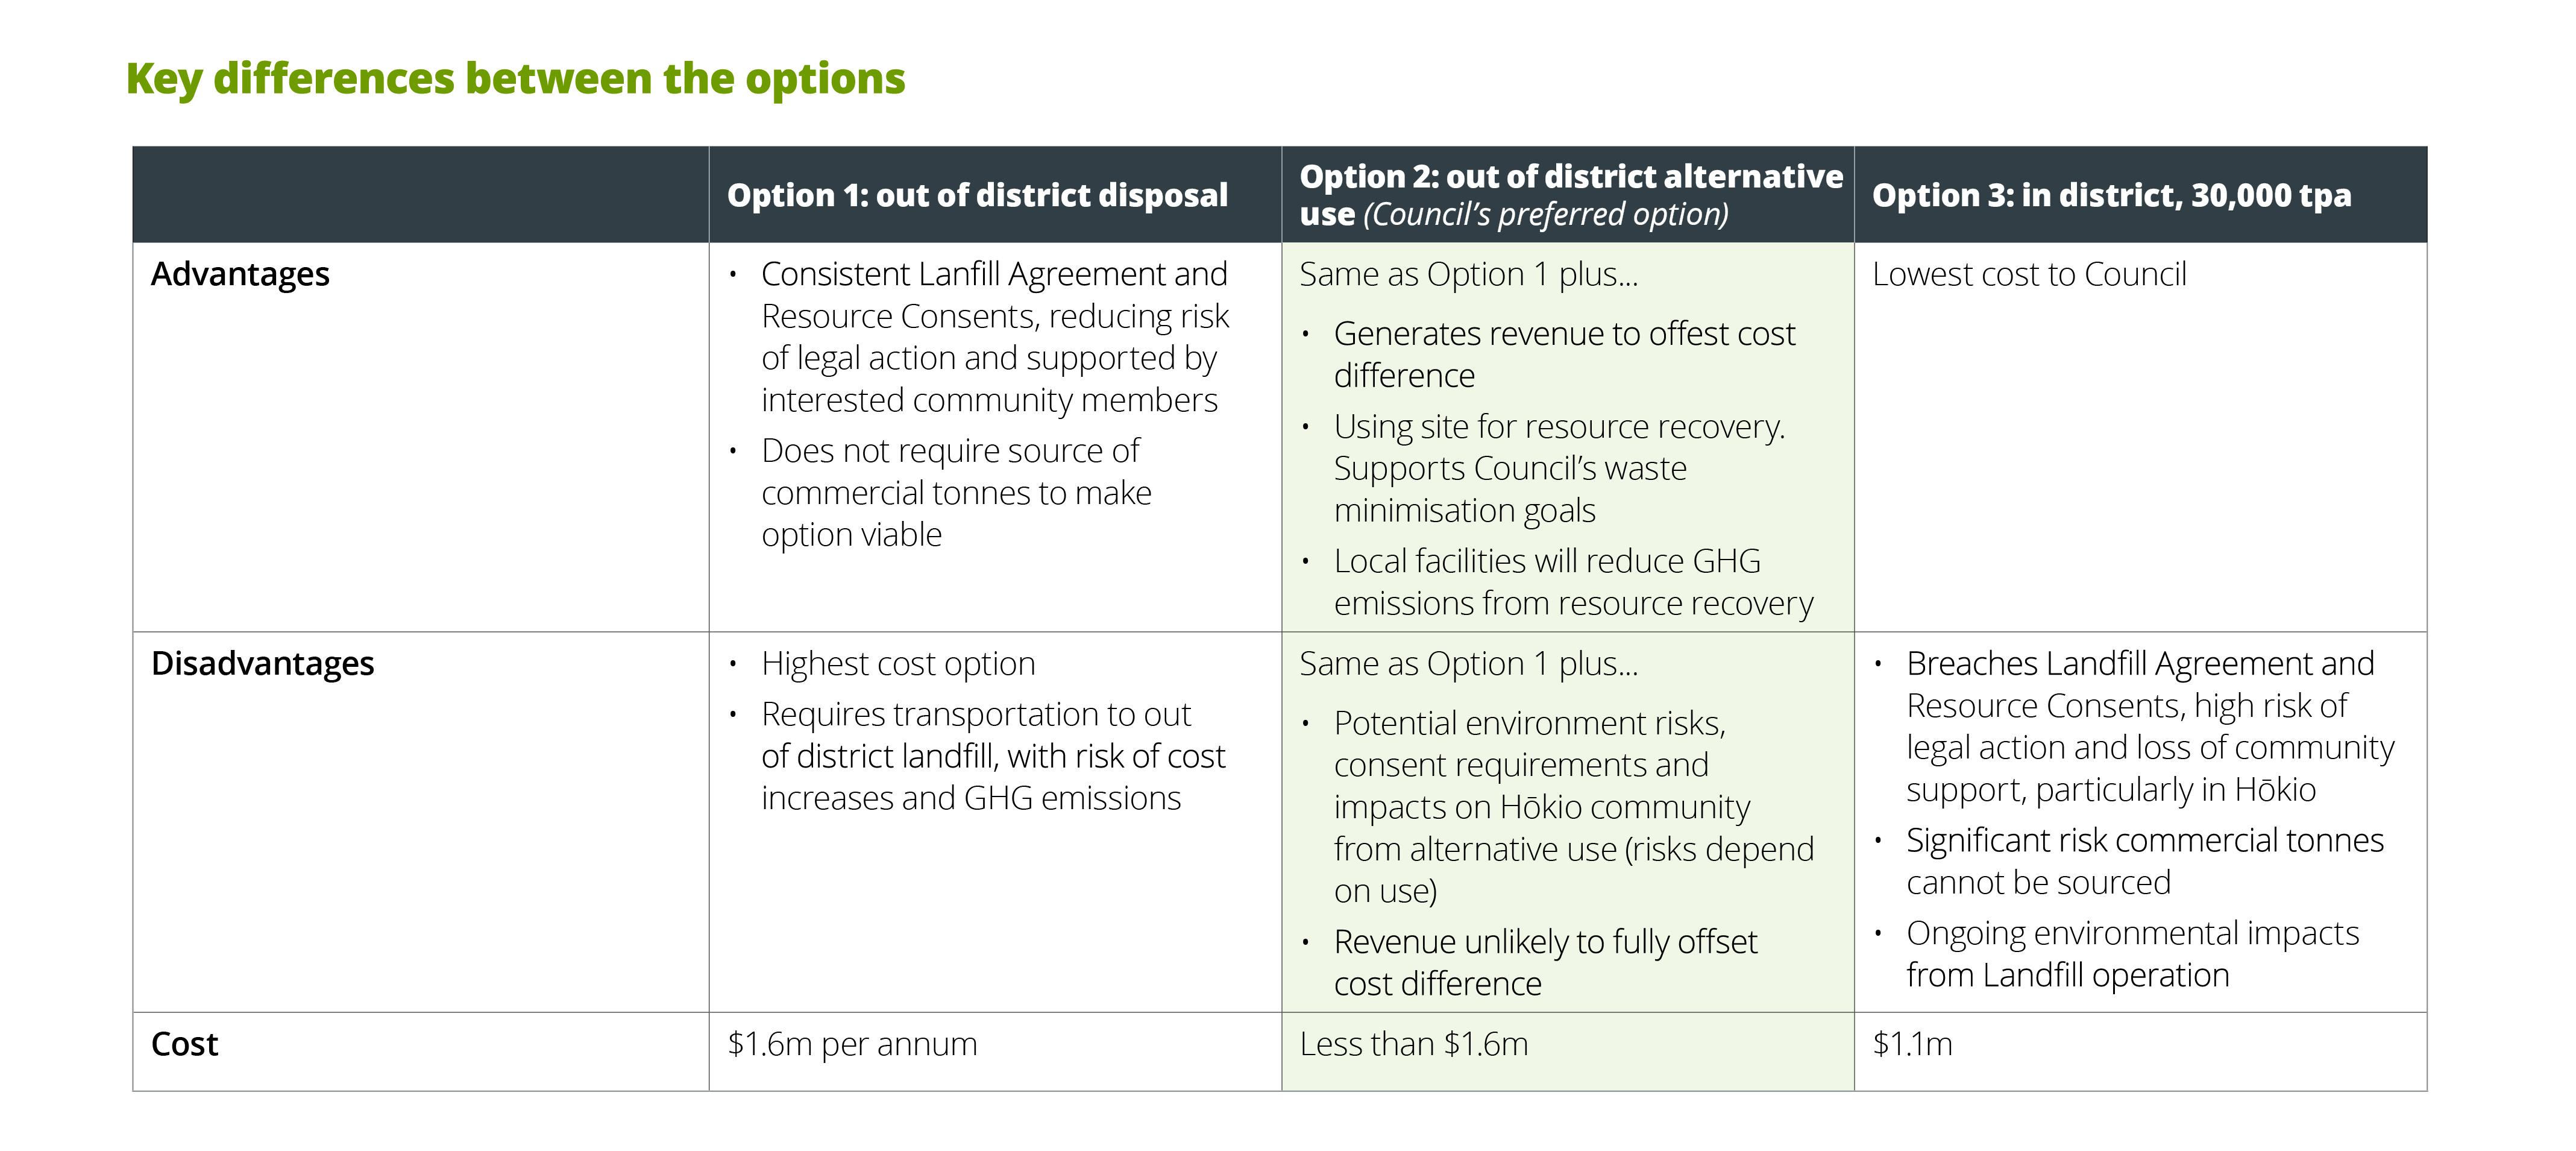 Key differences between the options